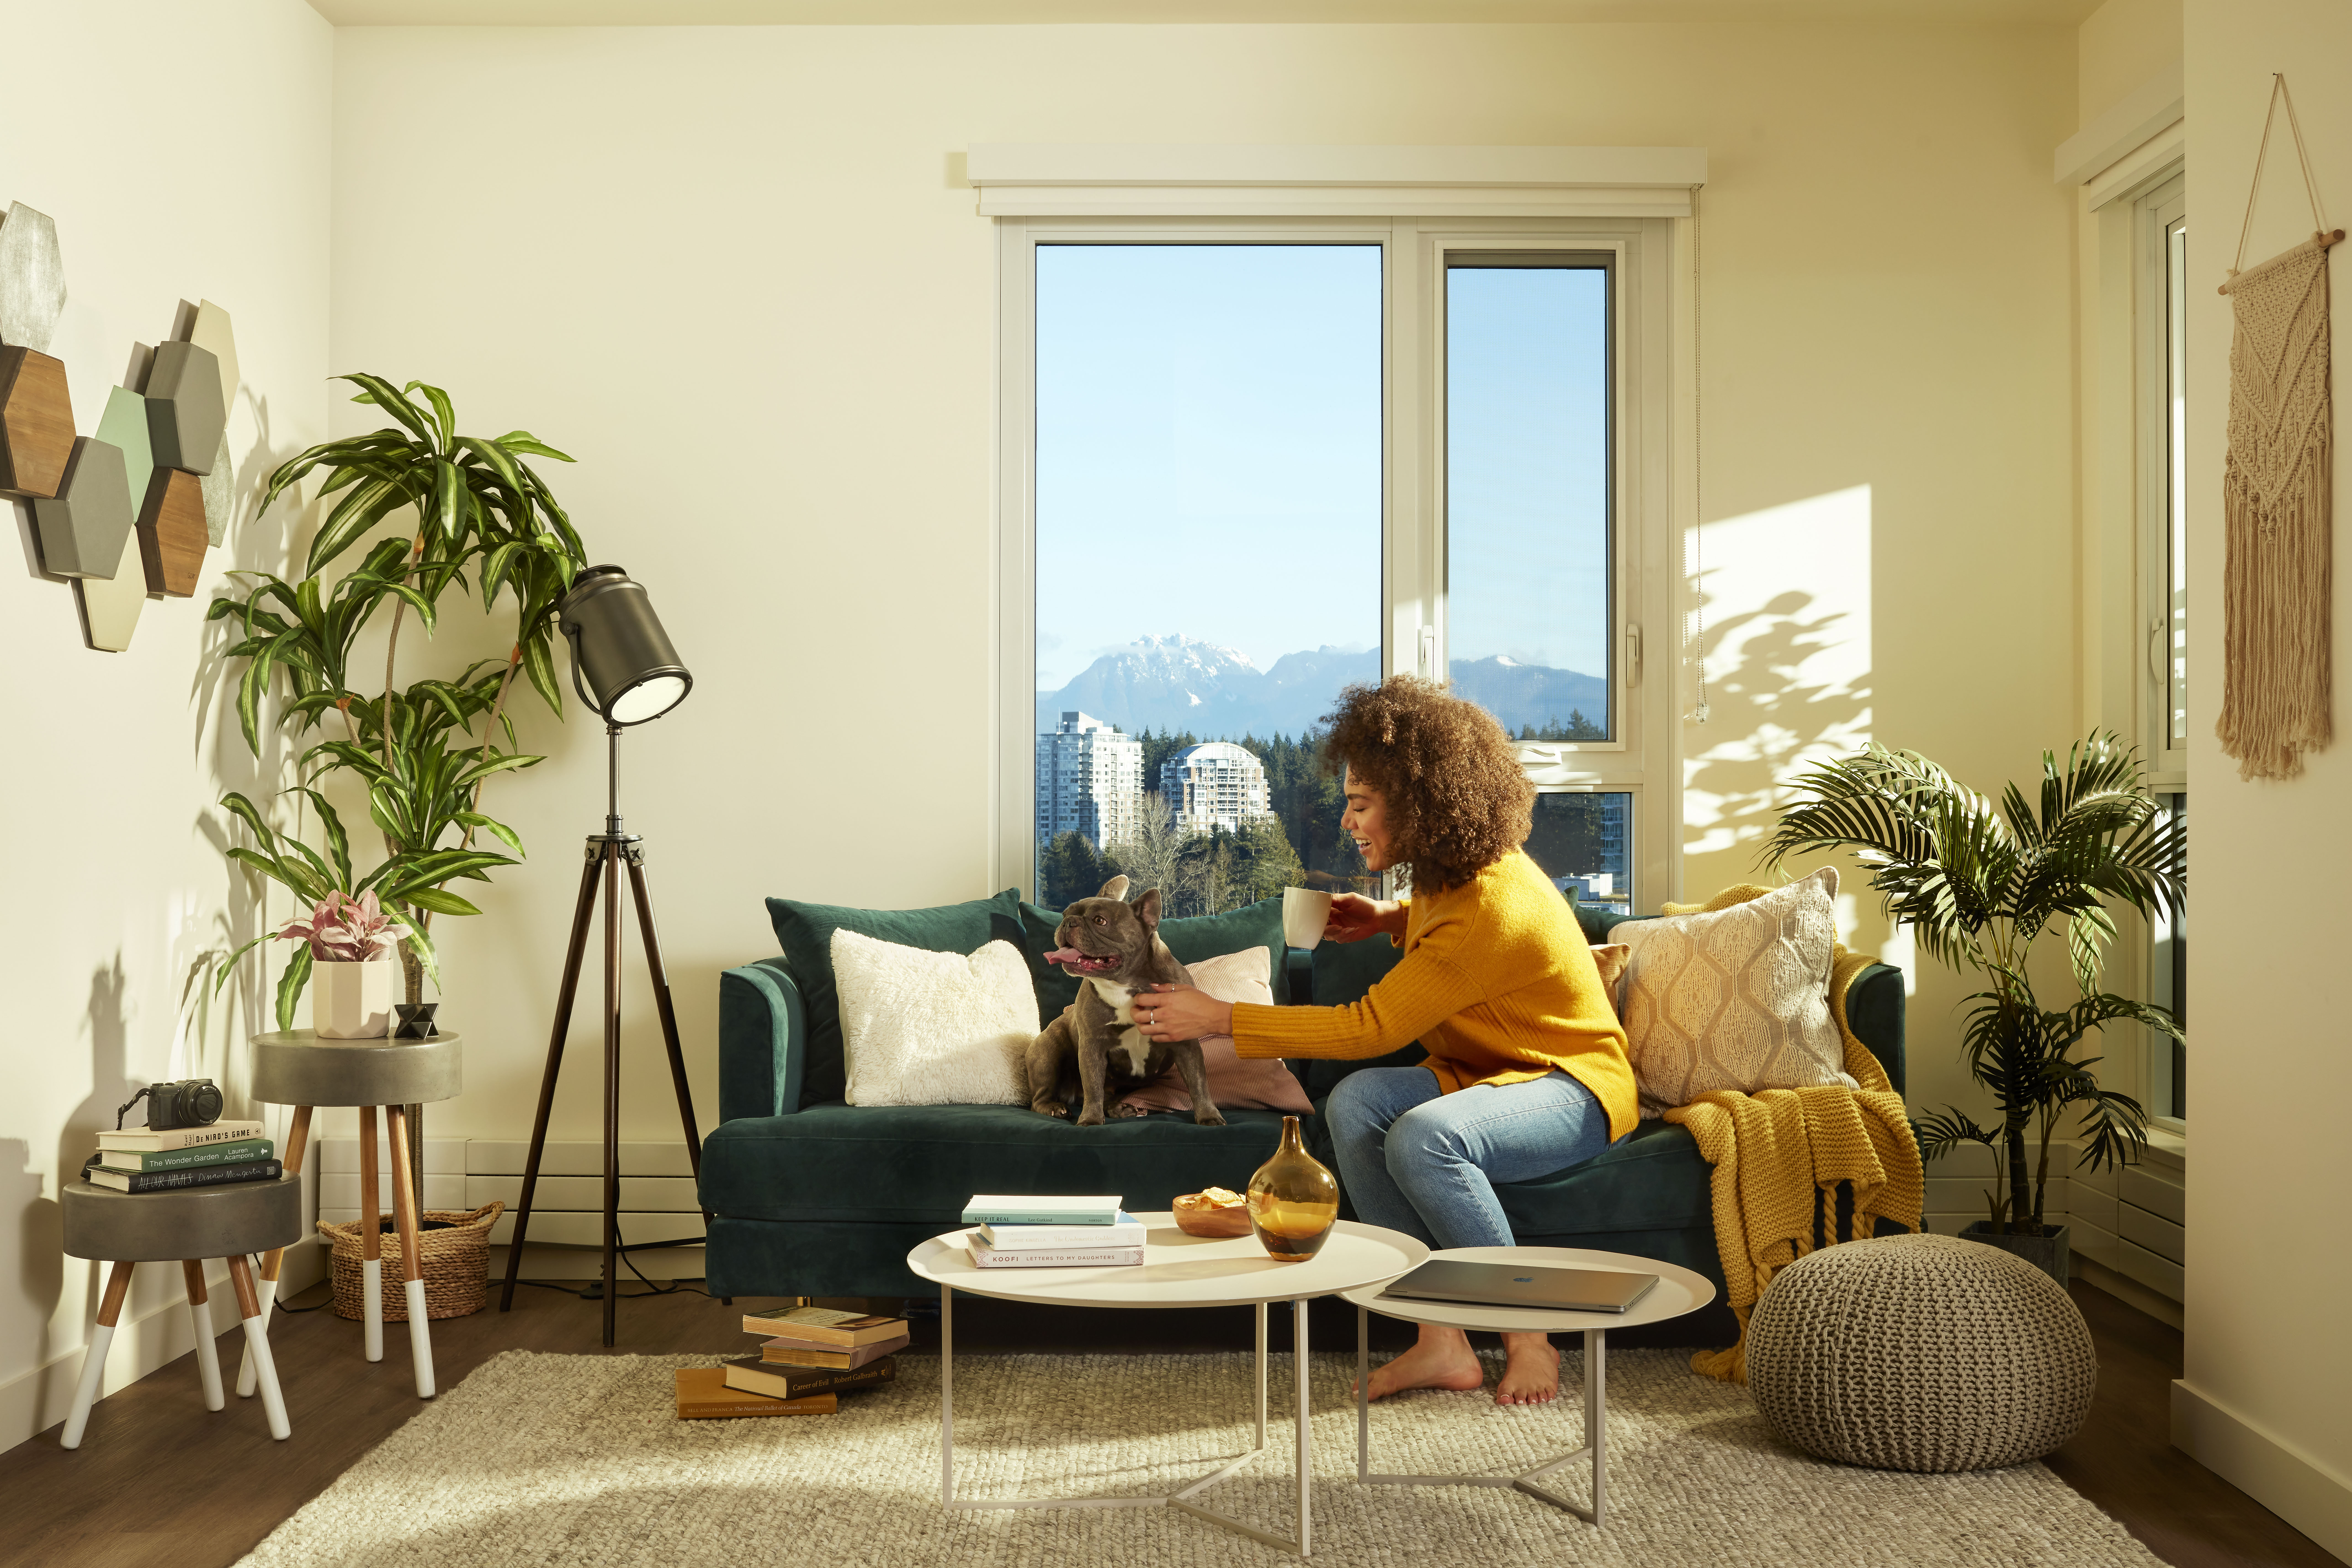 Woman in her living room on a couch with her dog.